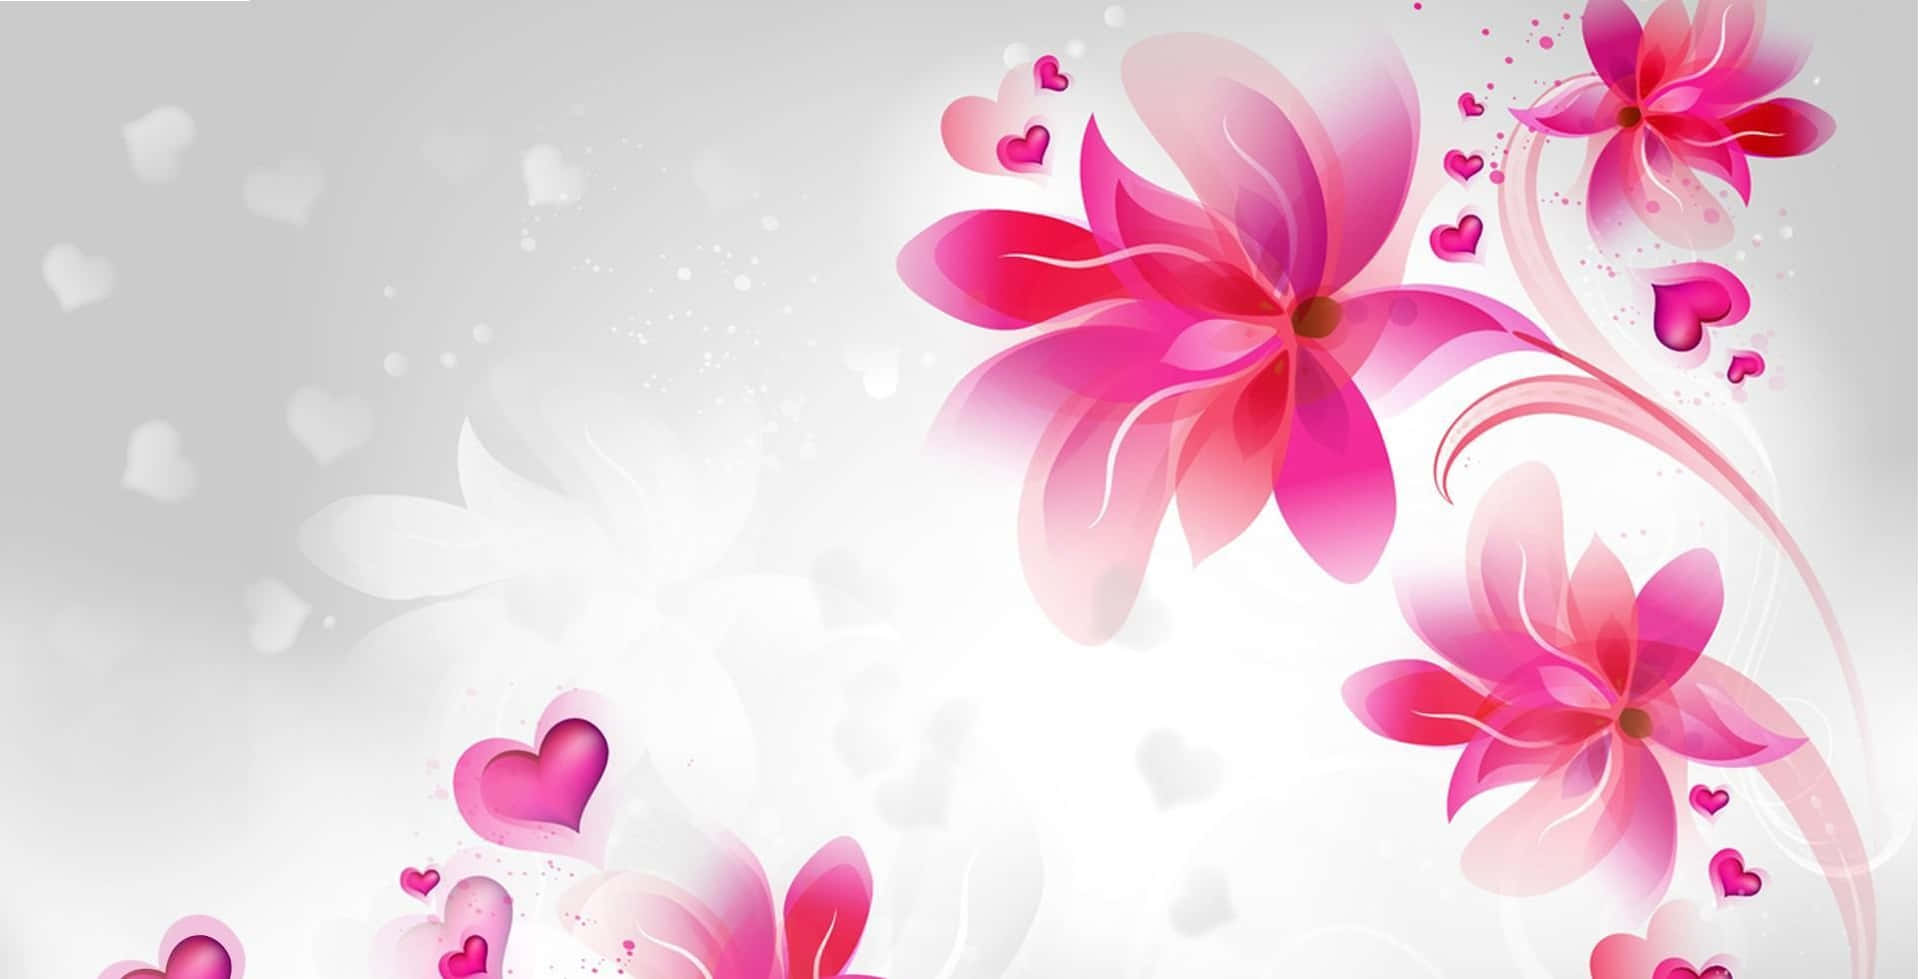 Abstract Pink Floral Design Wallpaper